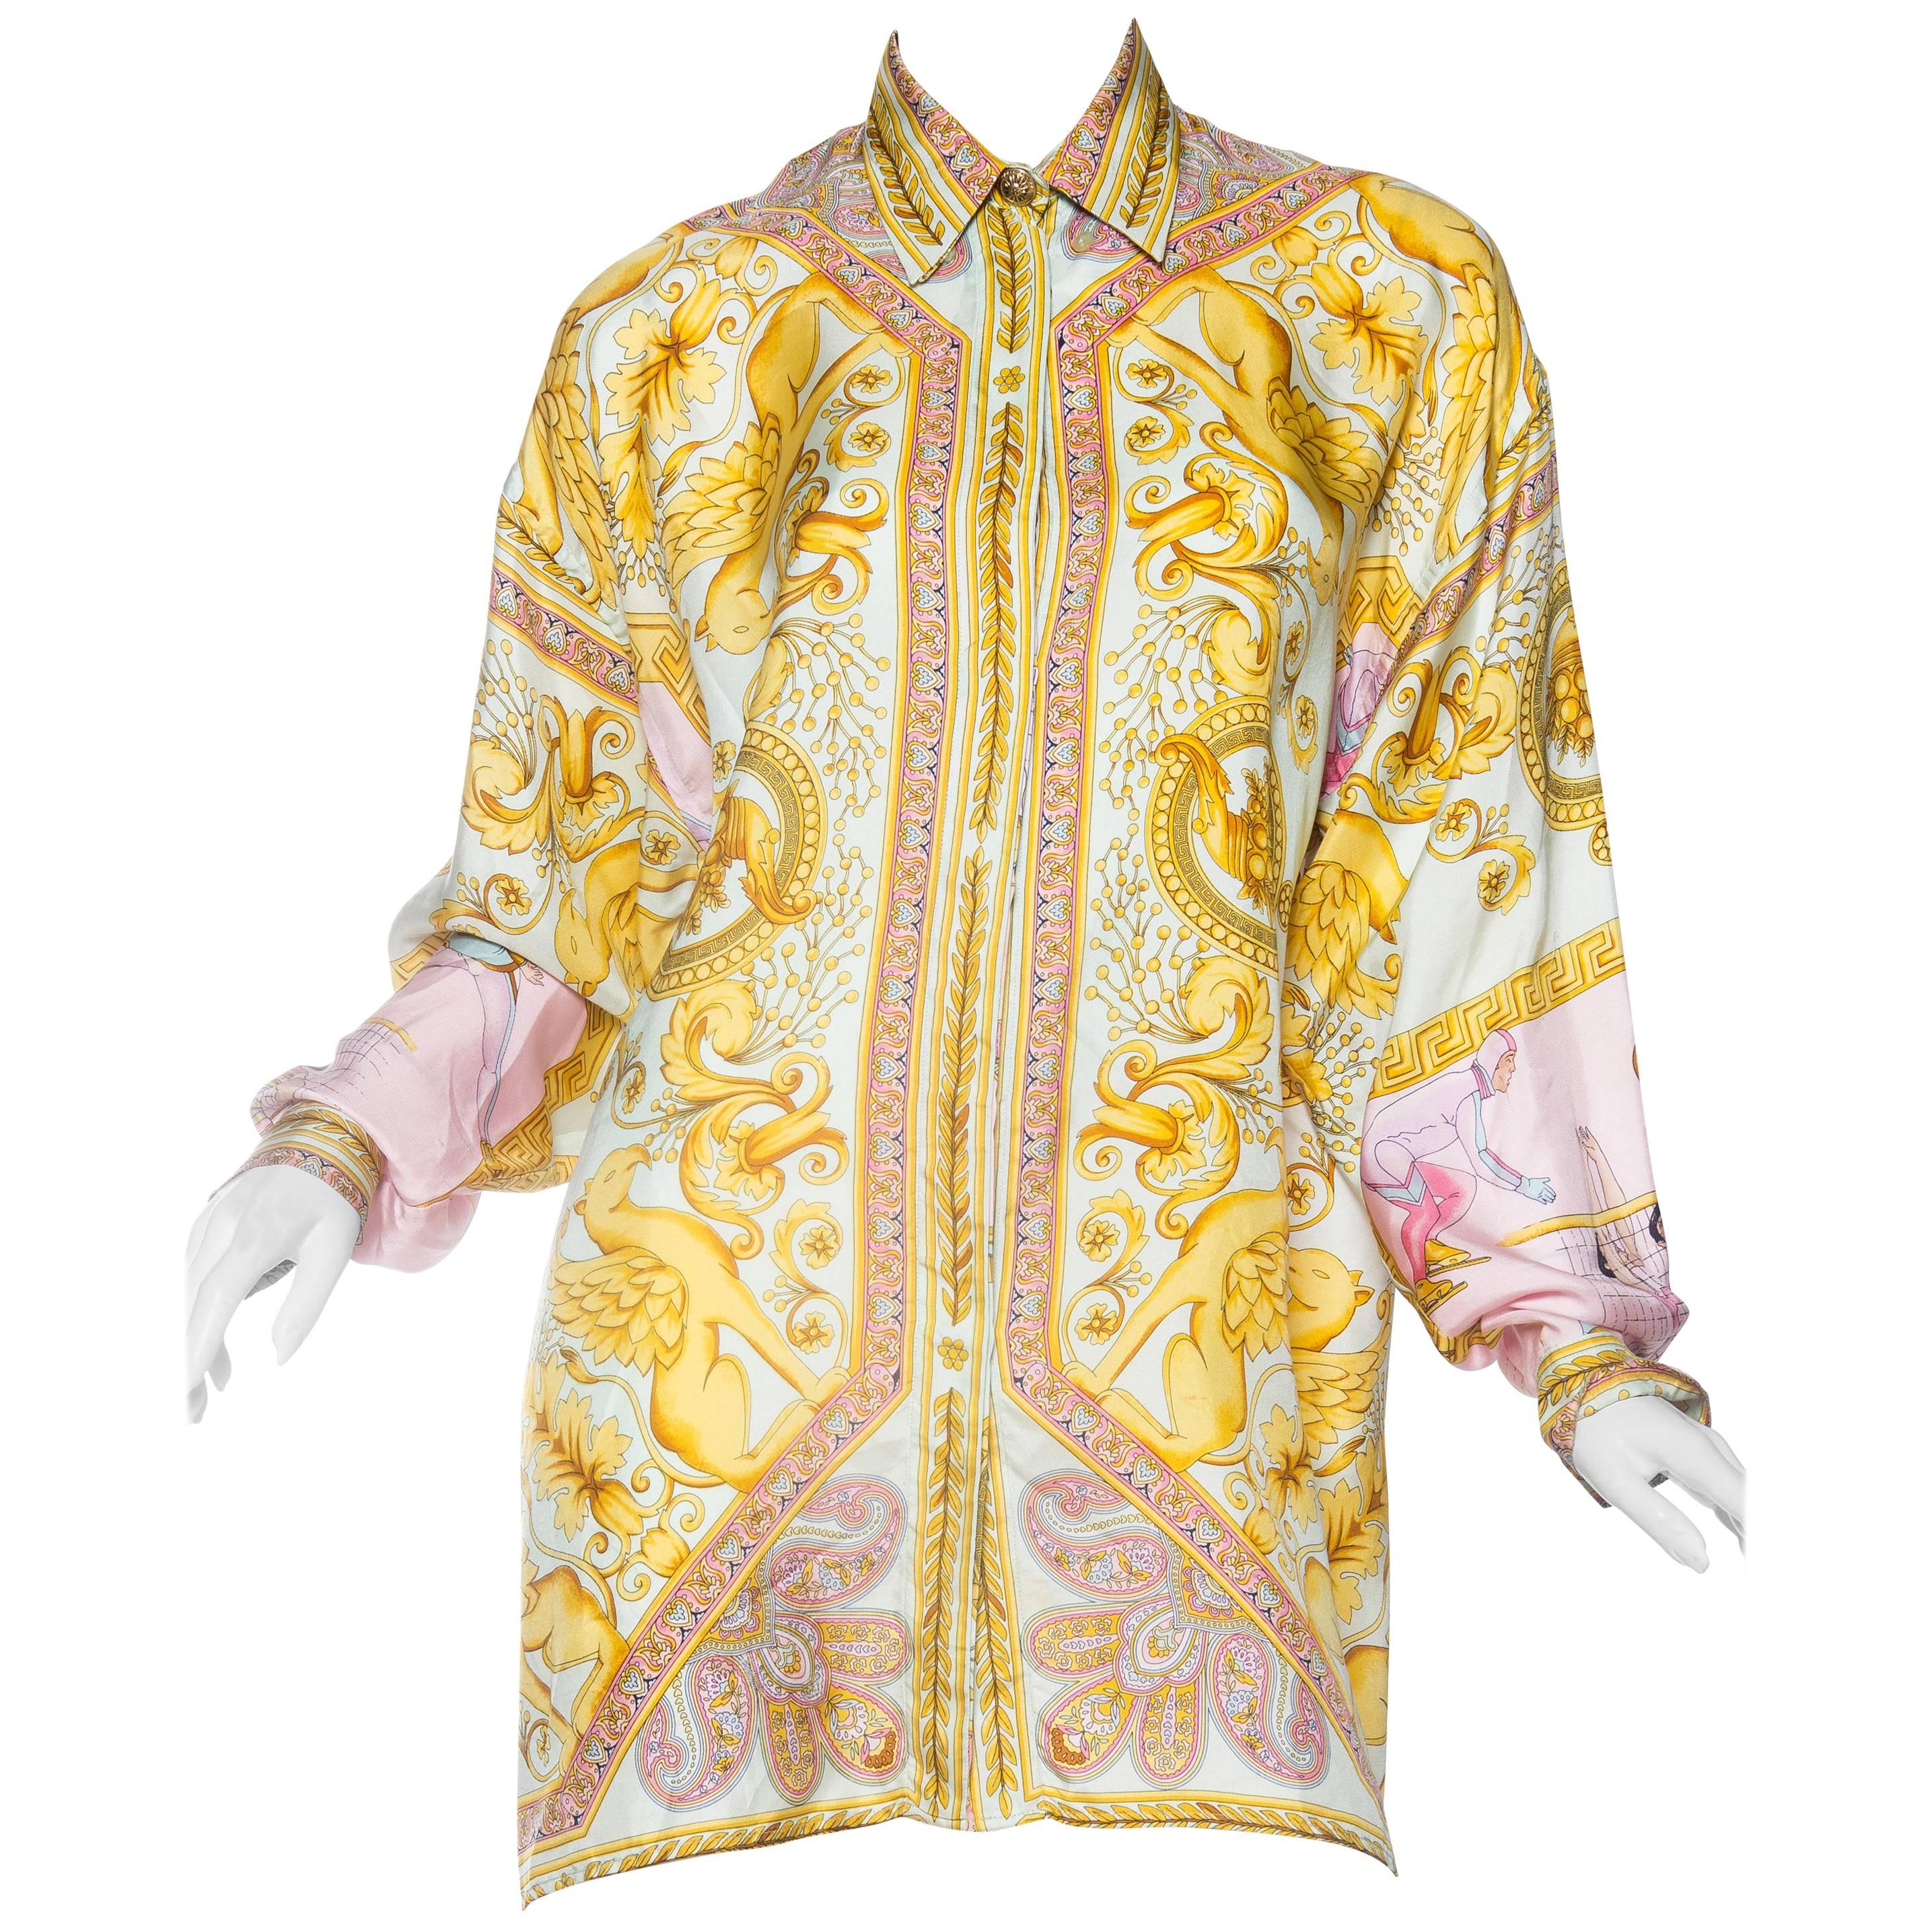 1990s Gianni Versace Gold Baroque Print Blouse